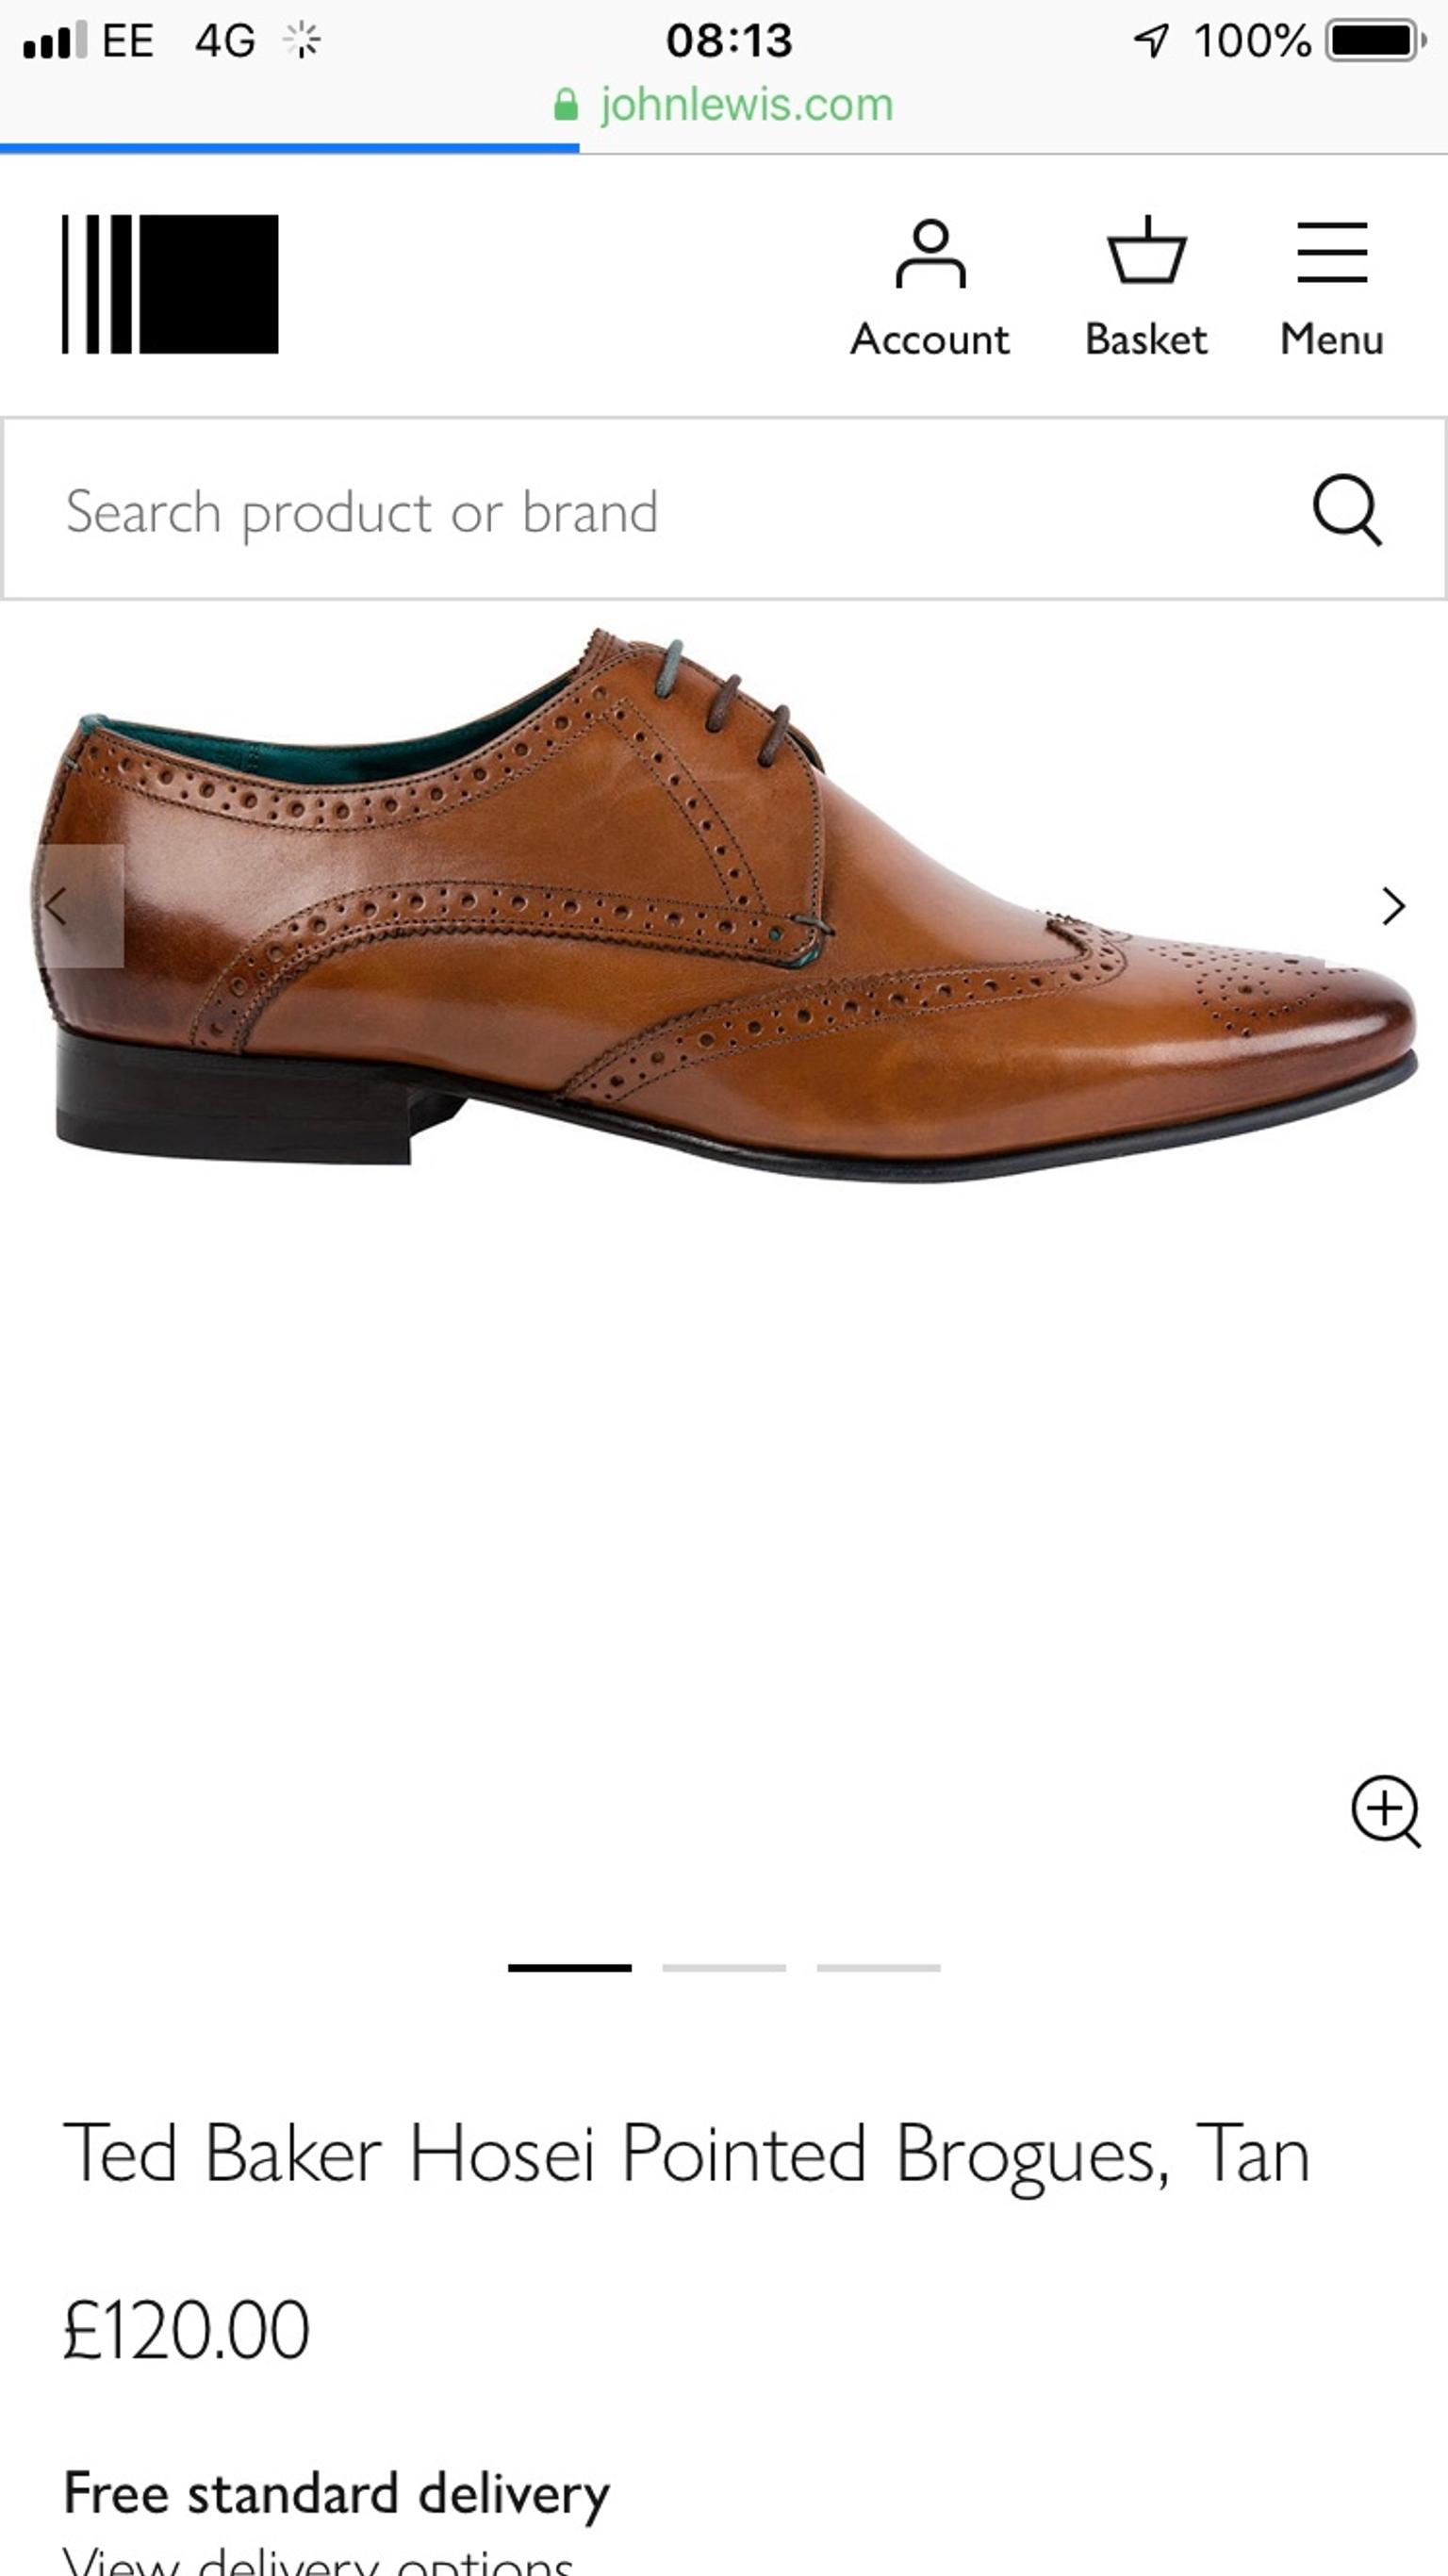 ted baker hosei pointed brogues